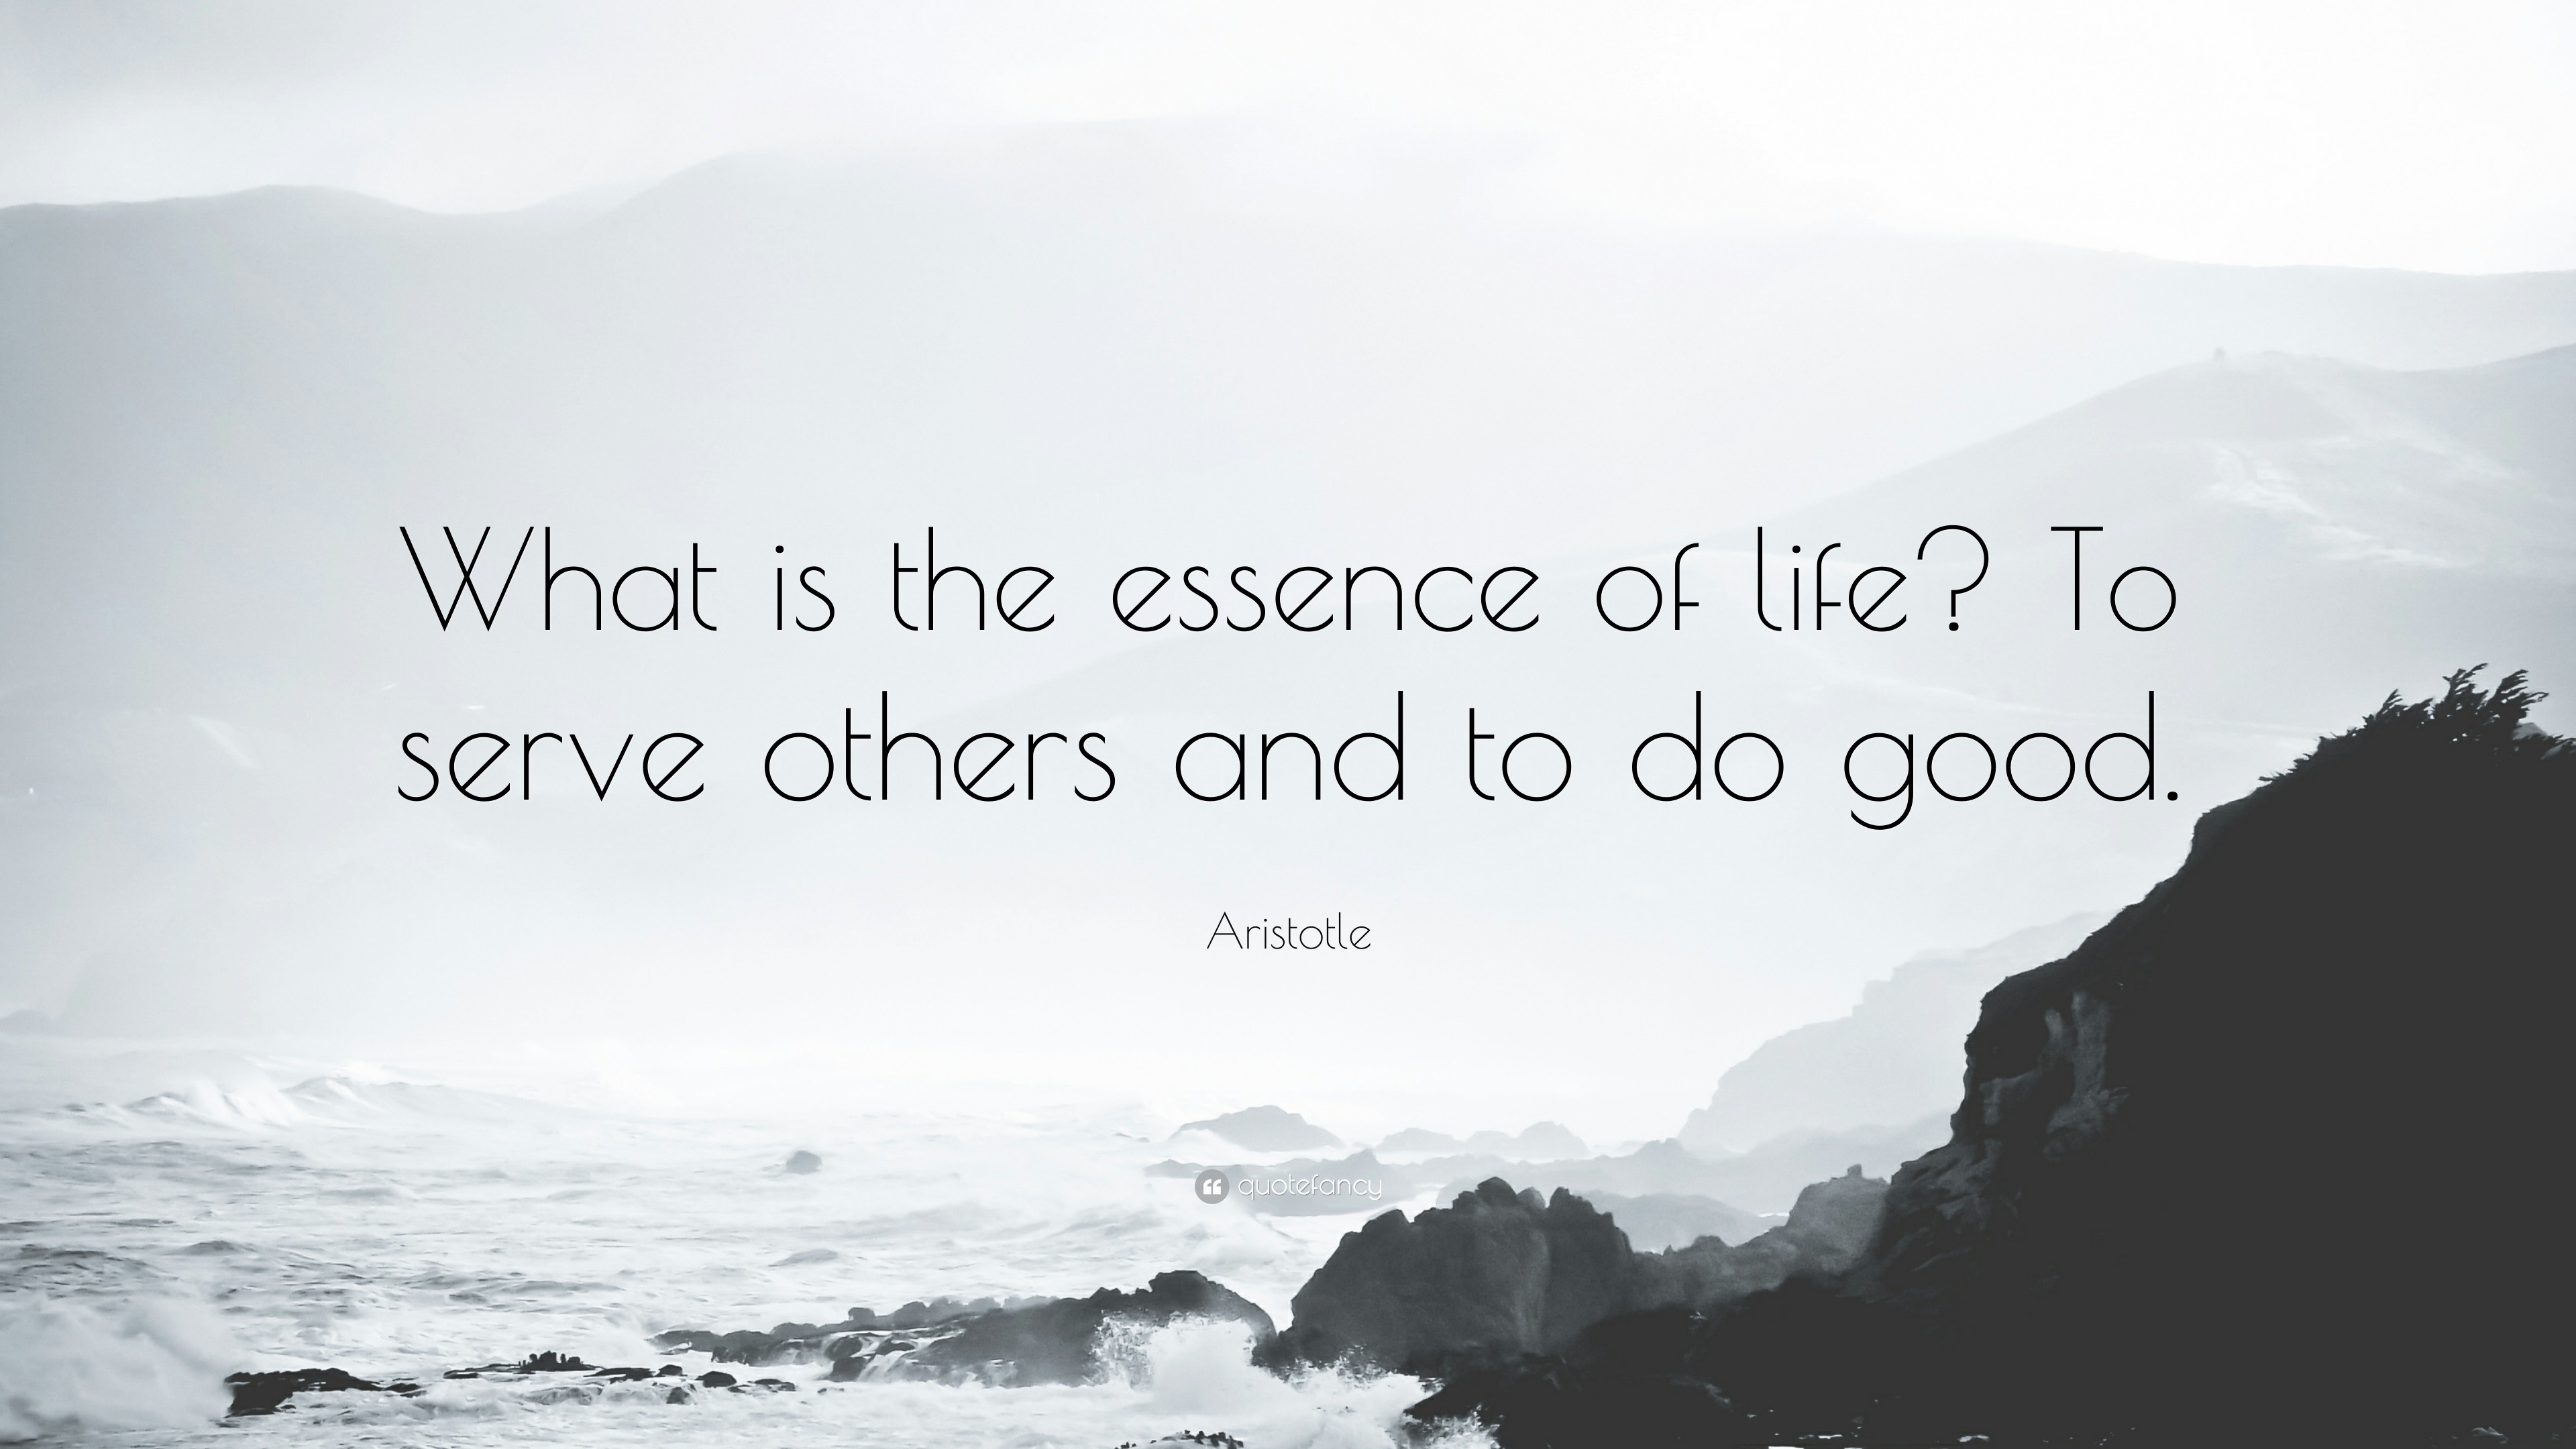 Aristotle Quote “What is the essence of life To serve others and to